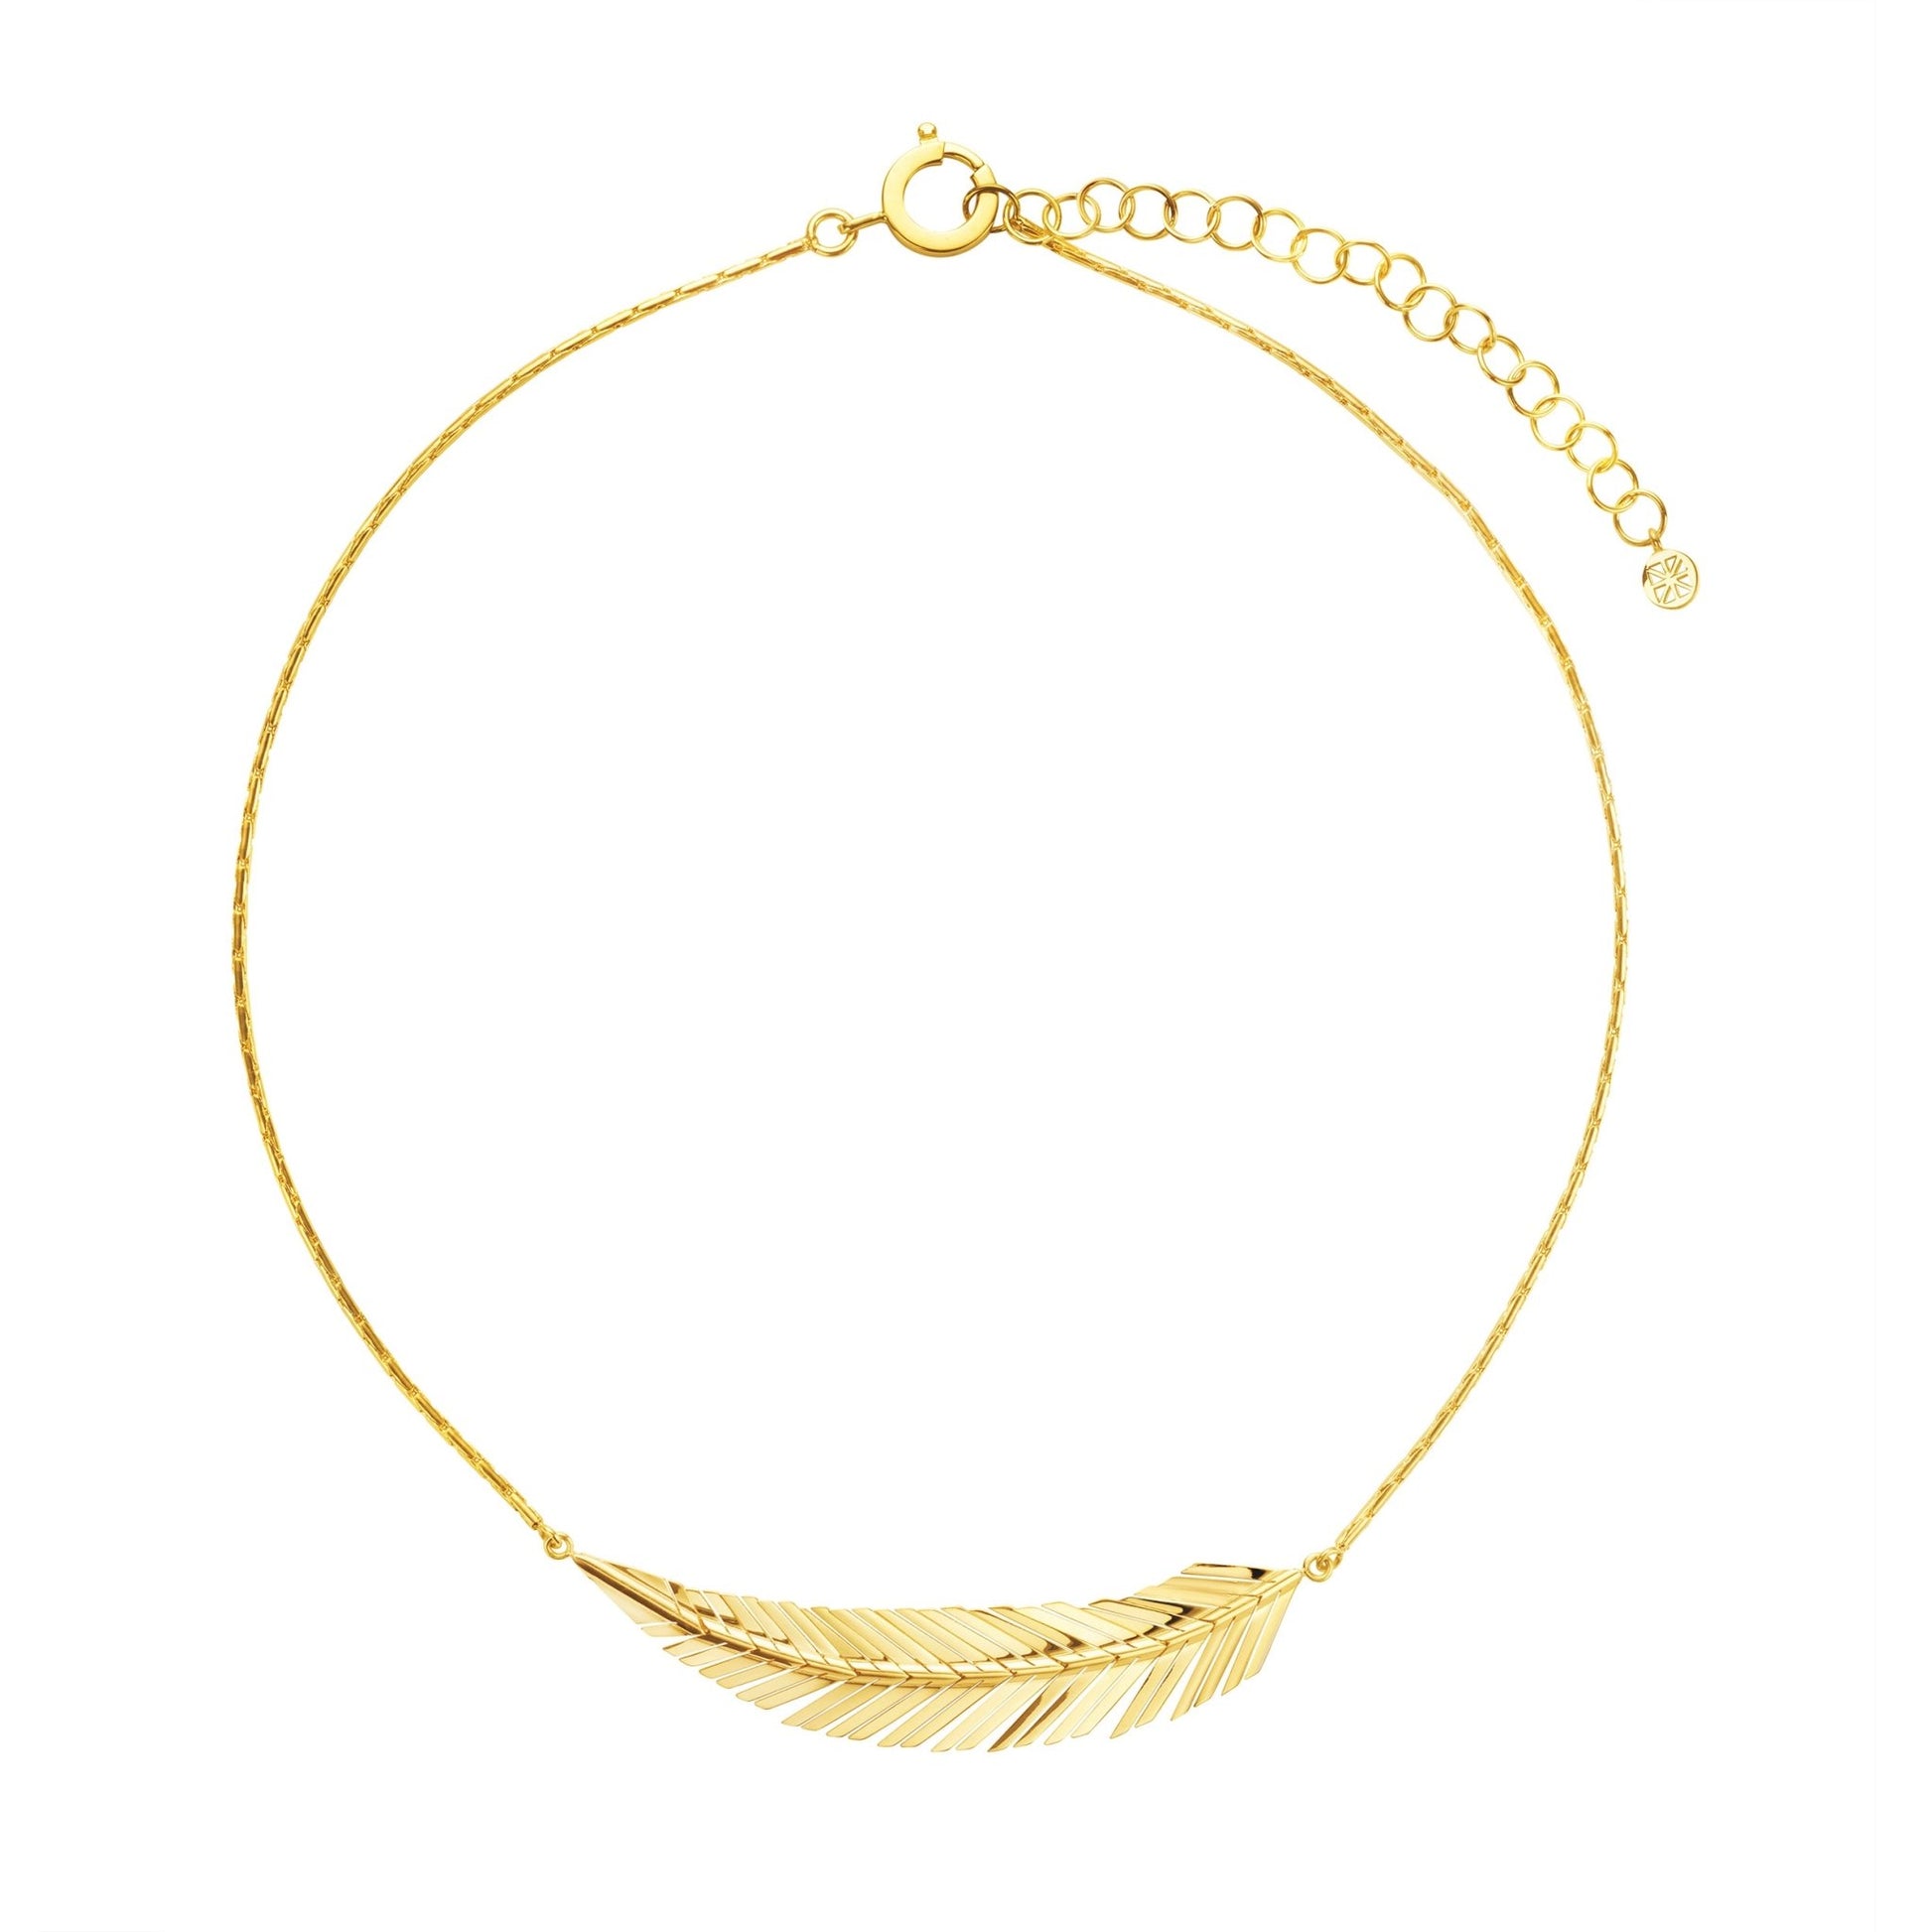 Go Create Metallic Silver & Gold Feathers, 18 ct.